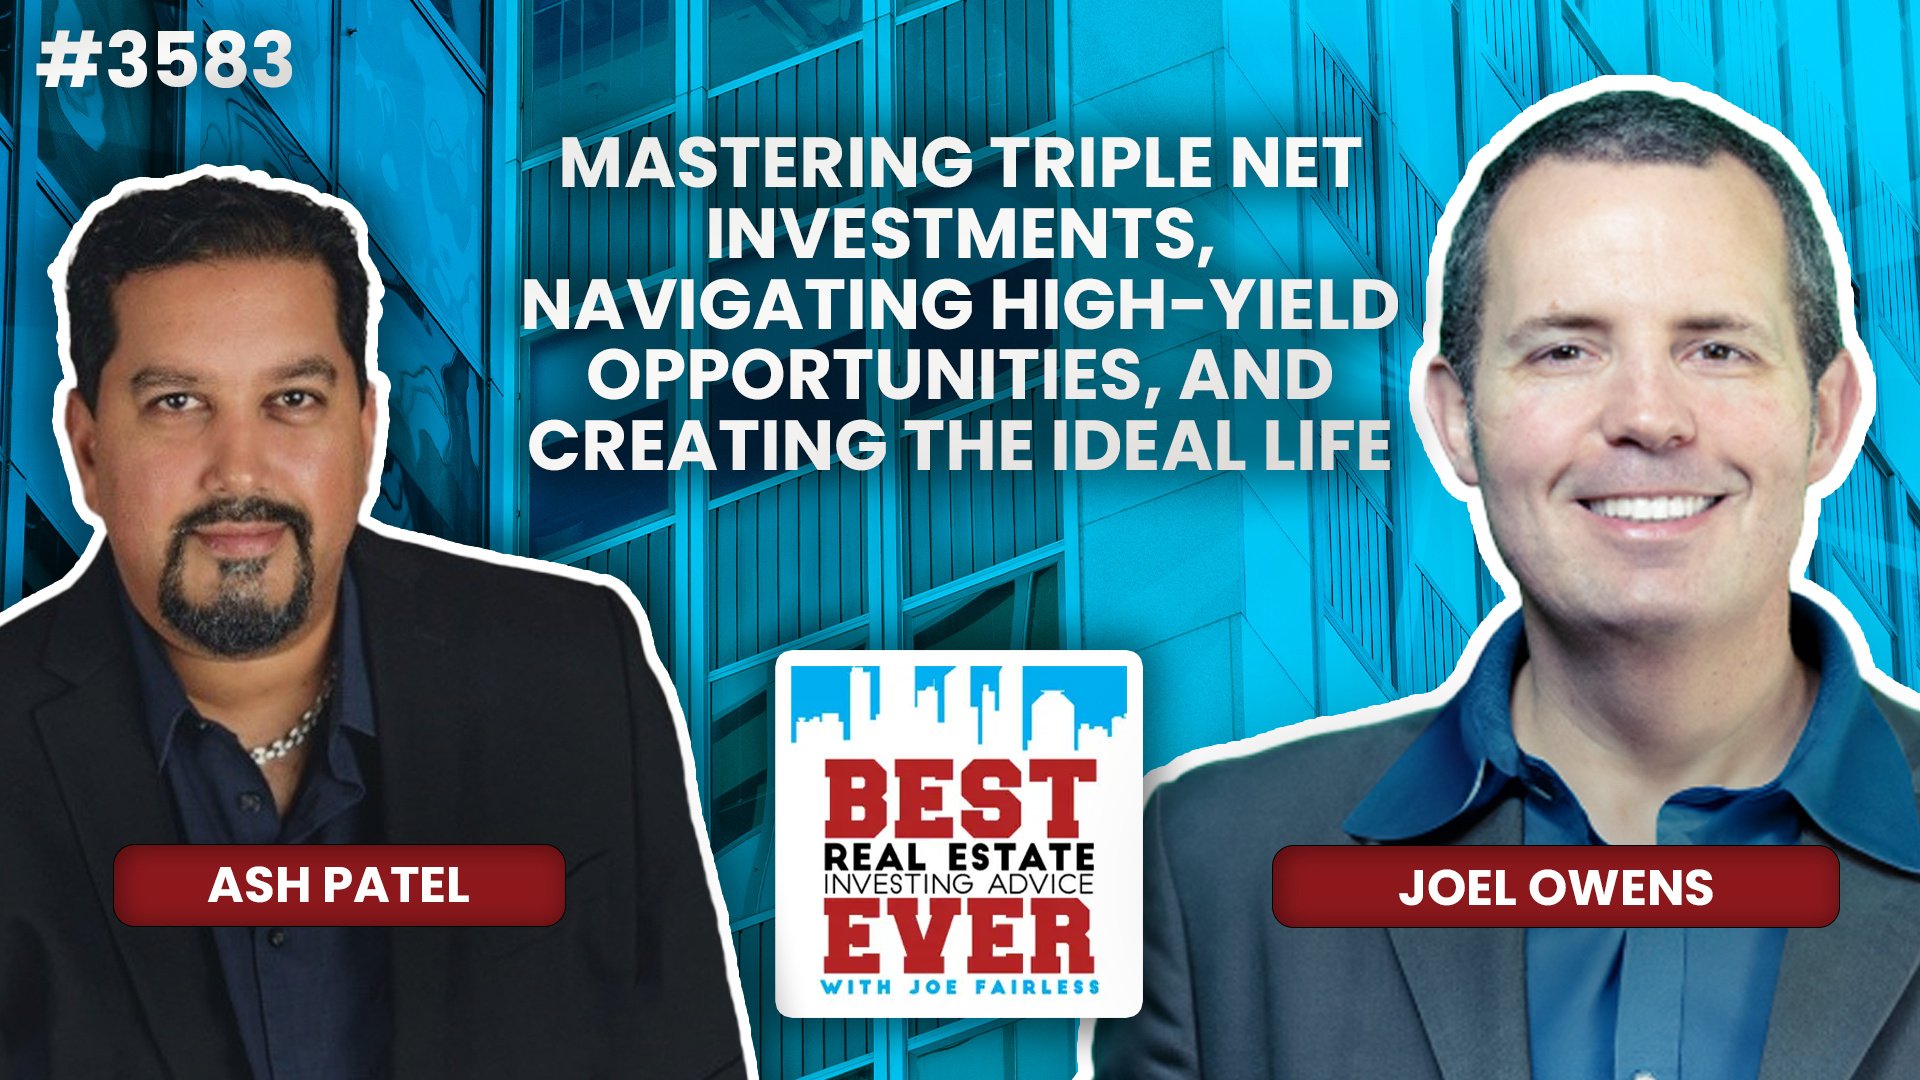 JF3583: Mastering Triple Net Investments, Navigating High-Yield Opportunities, and Creating the Ideal Life ft. Joel Owens